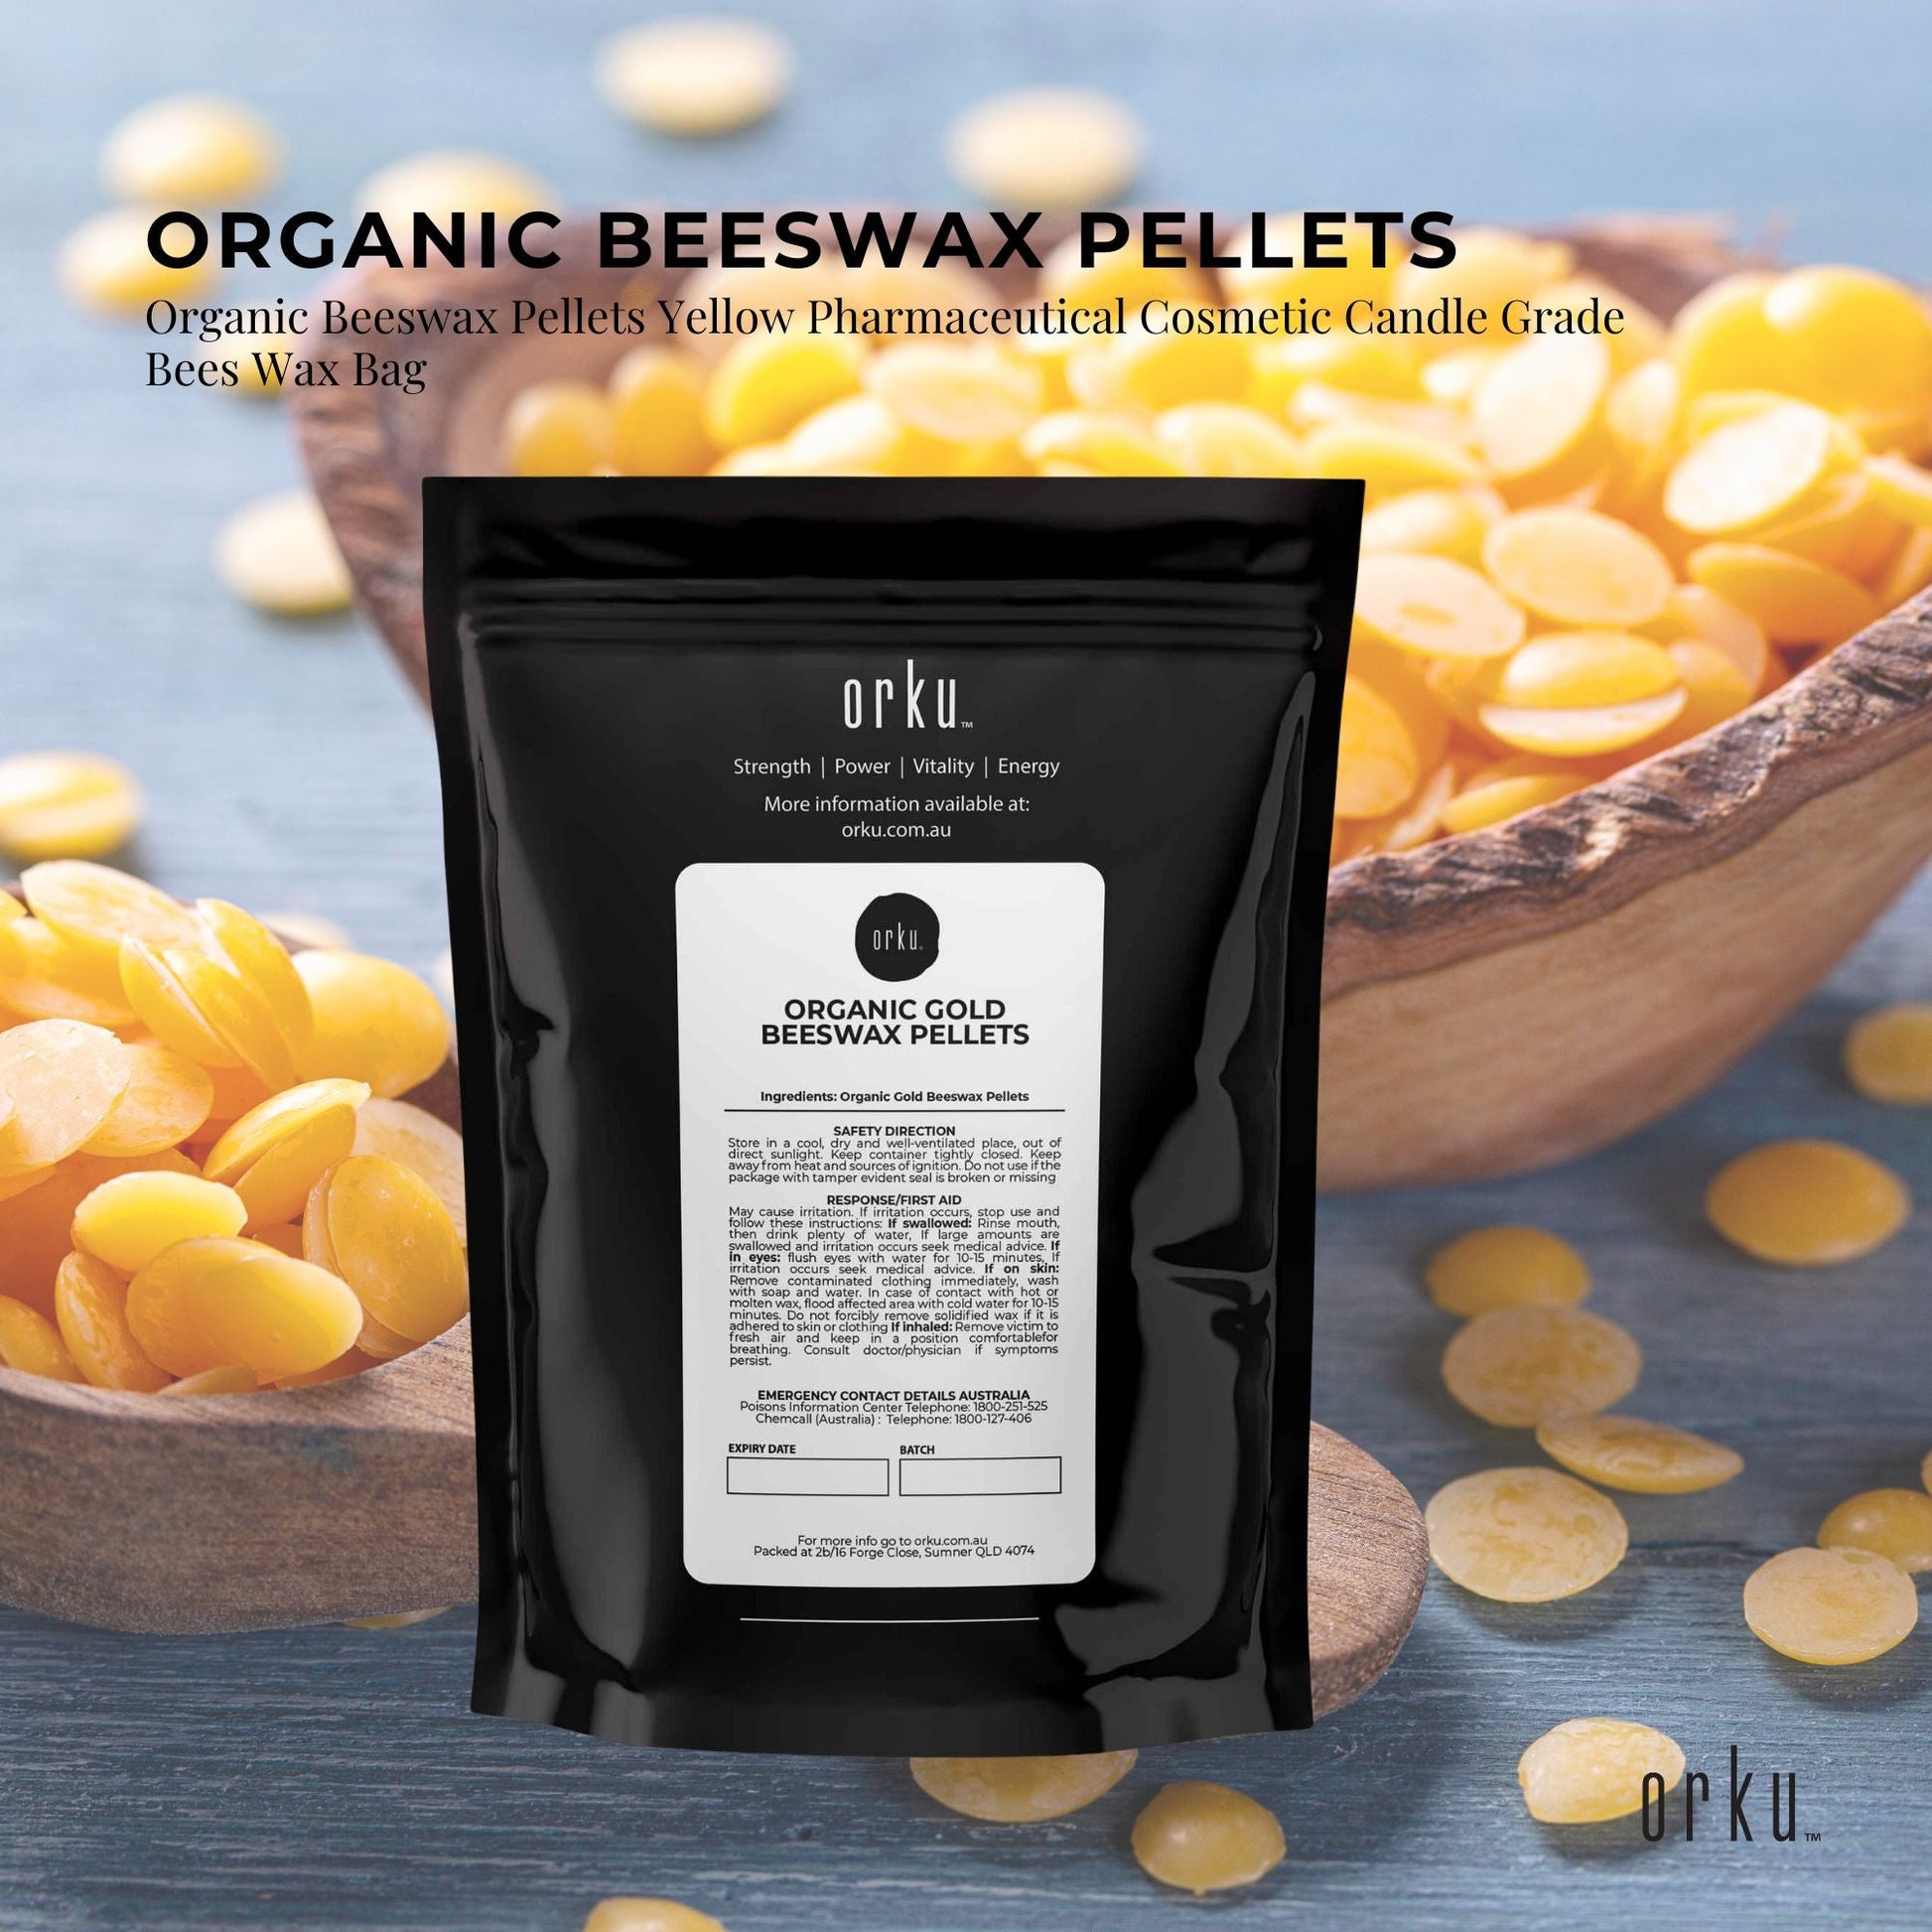 1kg Organic Beeswax Pellets Yellow Pharmaceutical Cosmetic Candle Bees Wax